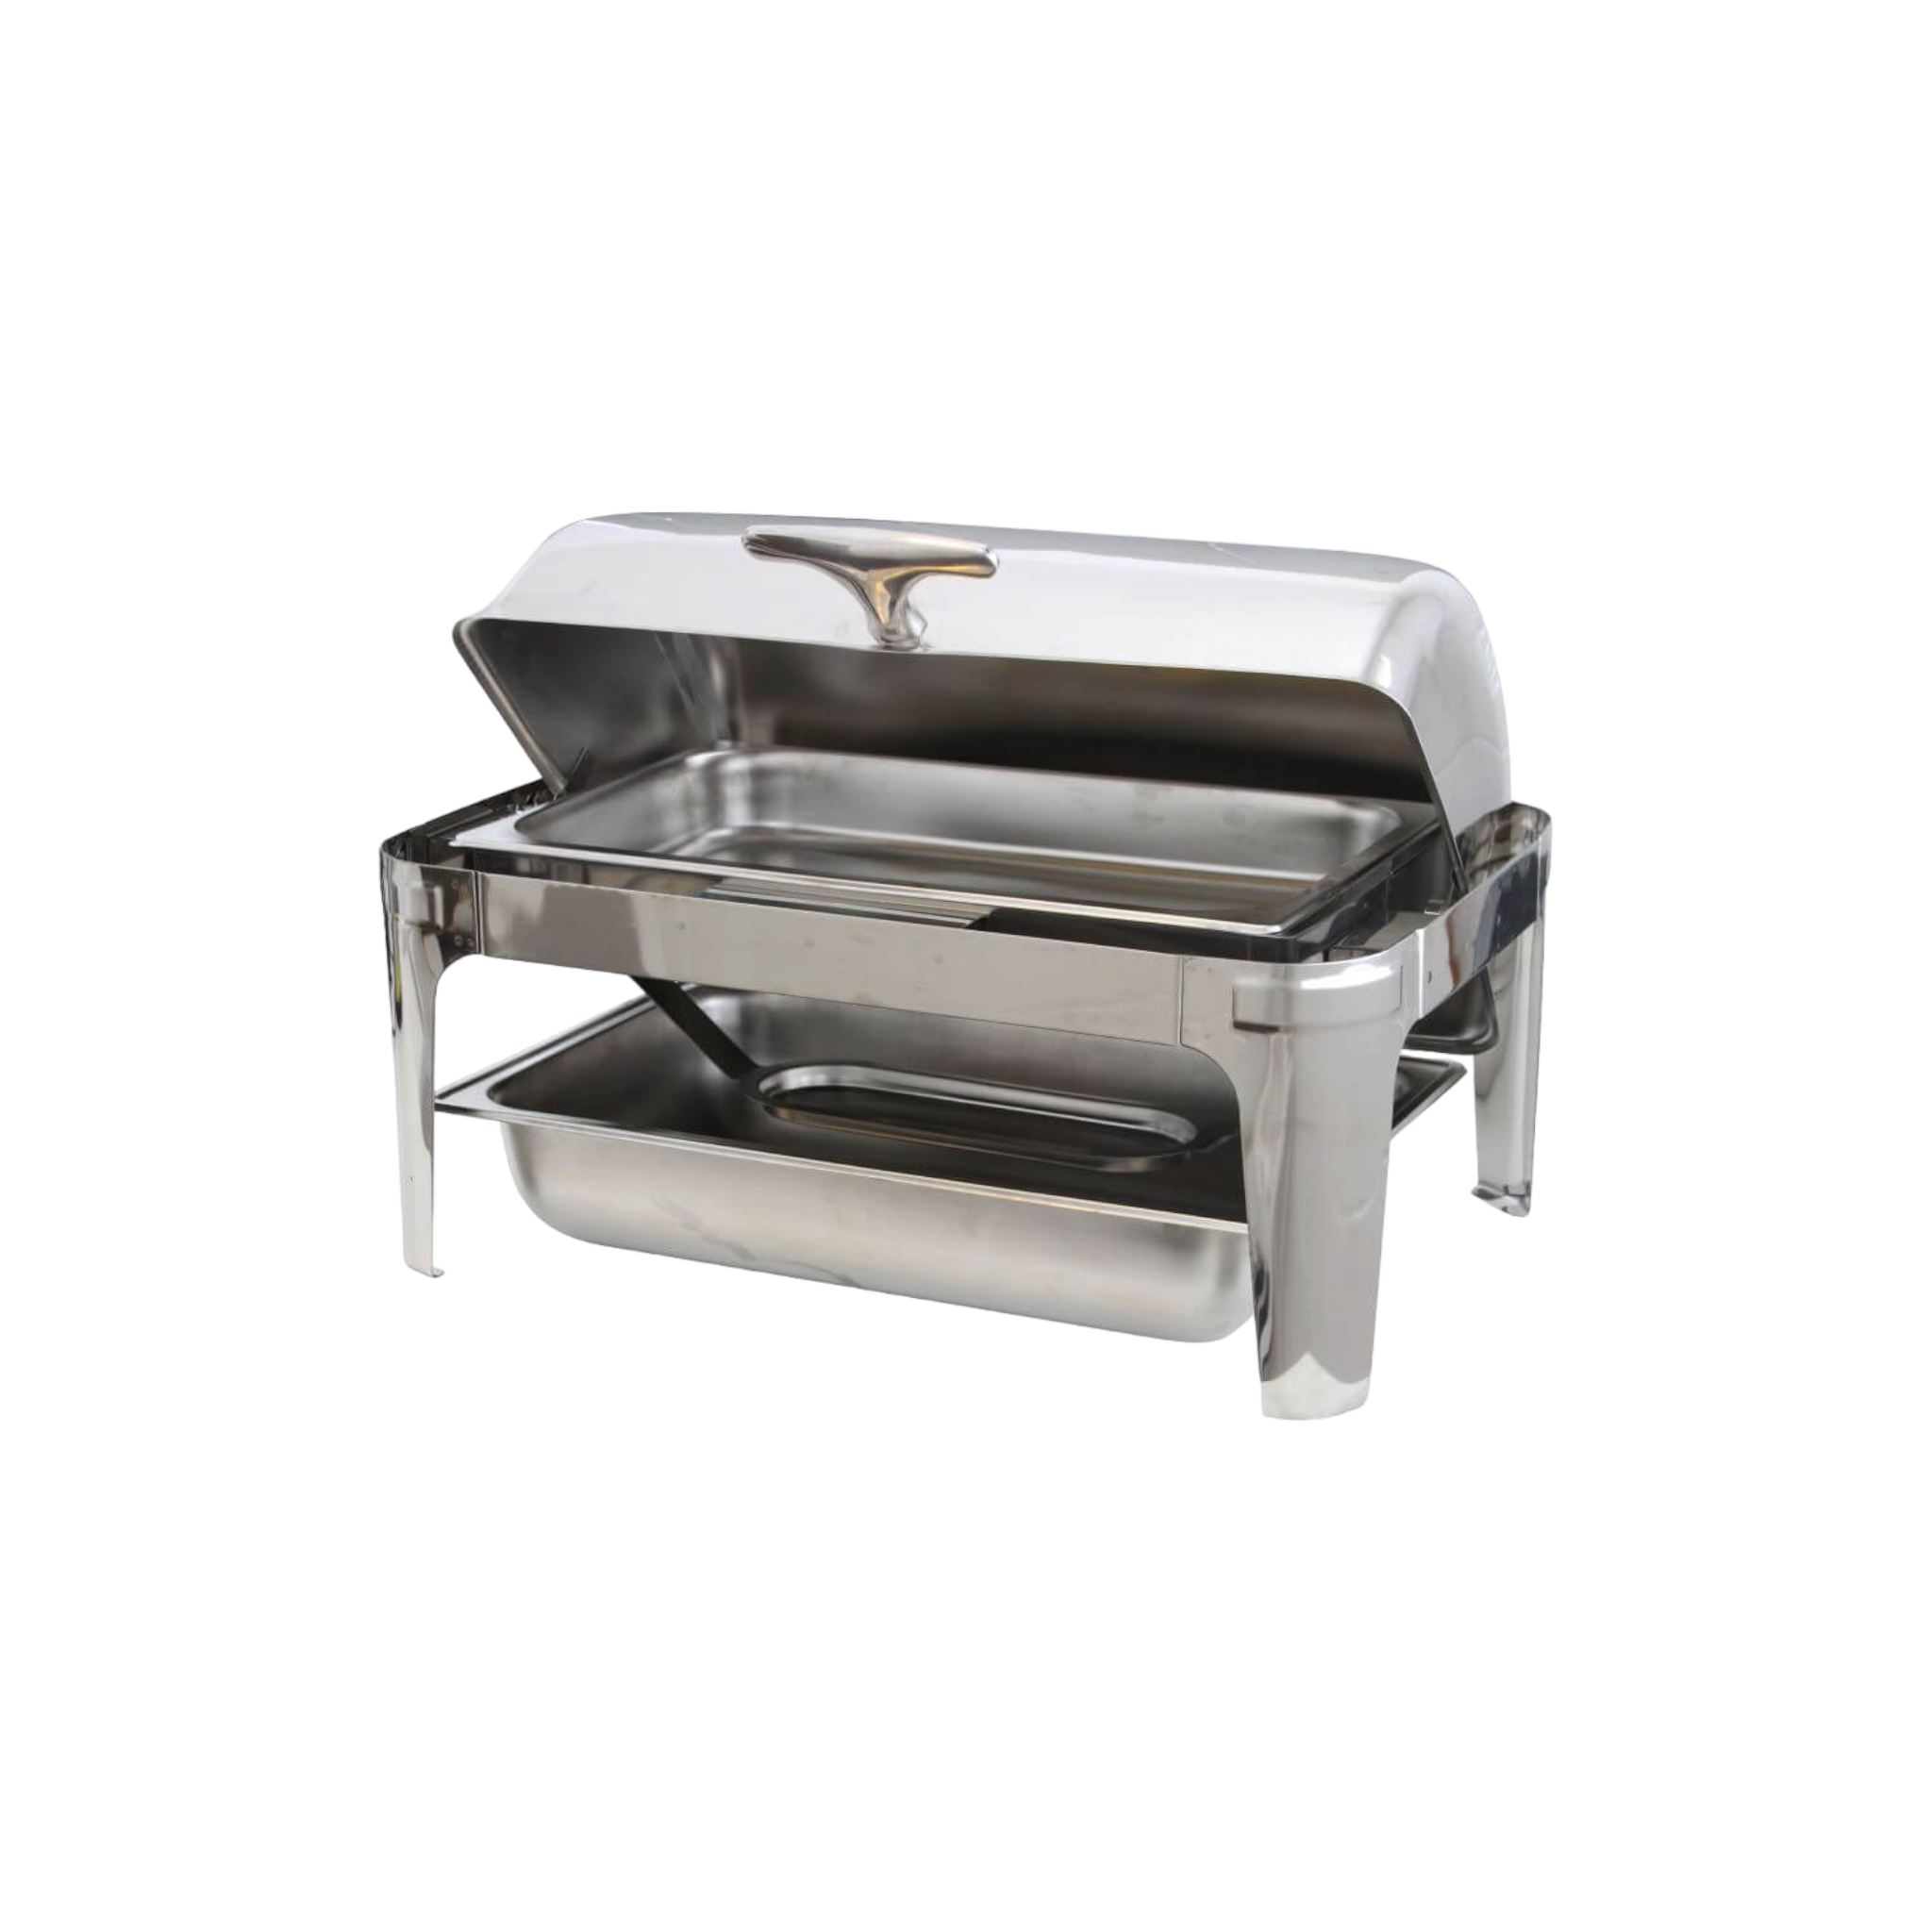 Chafing Dish Fancy Rectangular Roll on Top